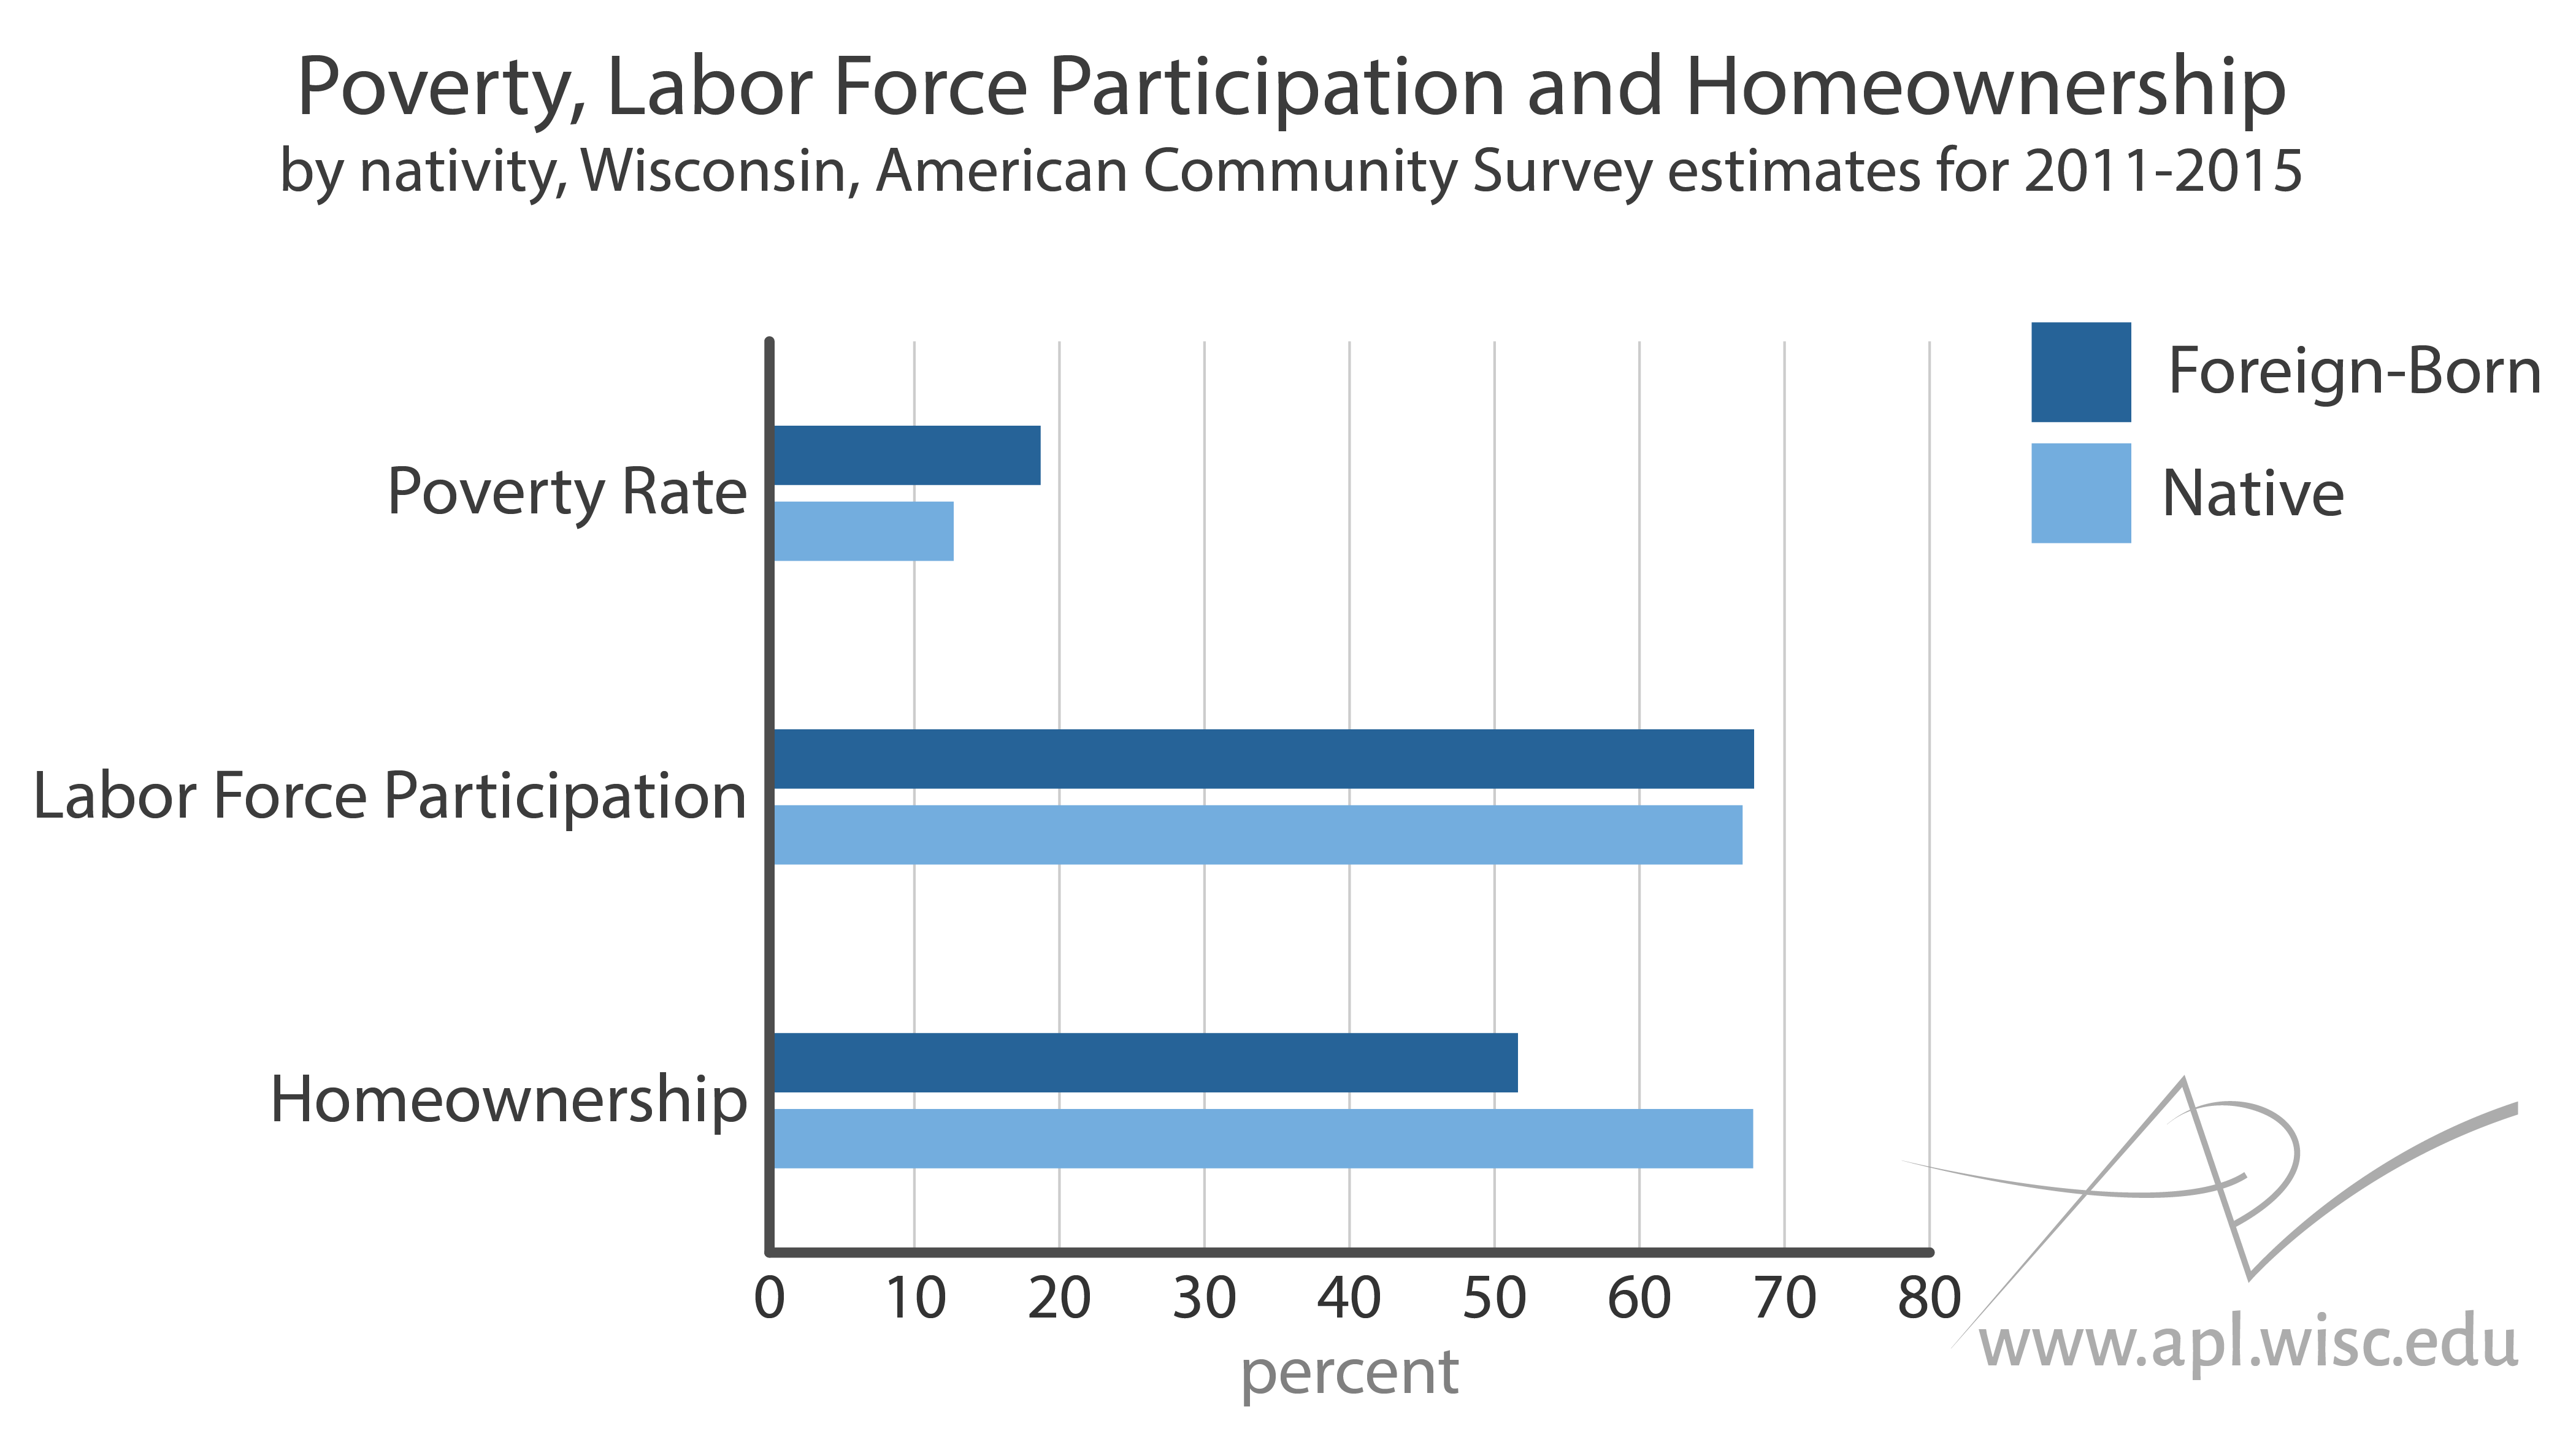 chart showing poverty rate, labor force participation, and homeownership rates for Wisconsin foreign-born and native-born residents